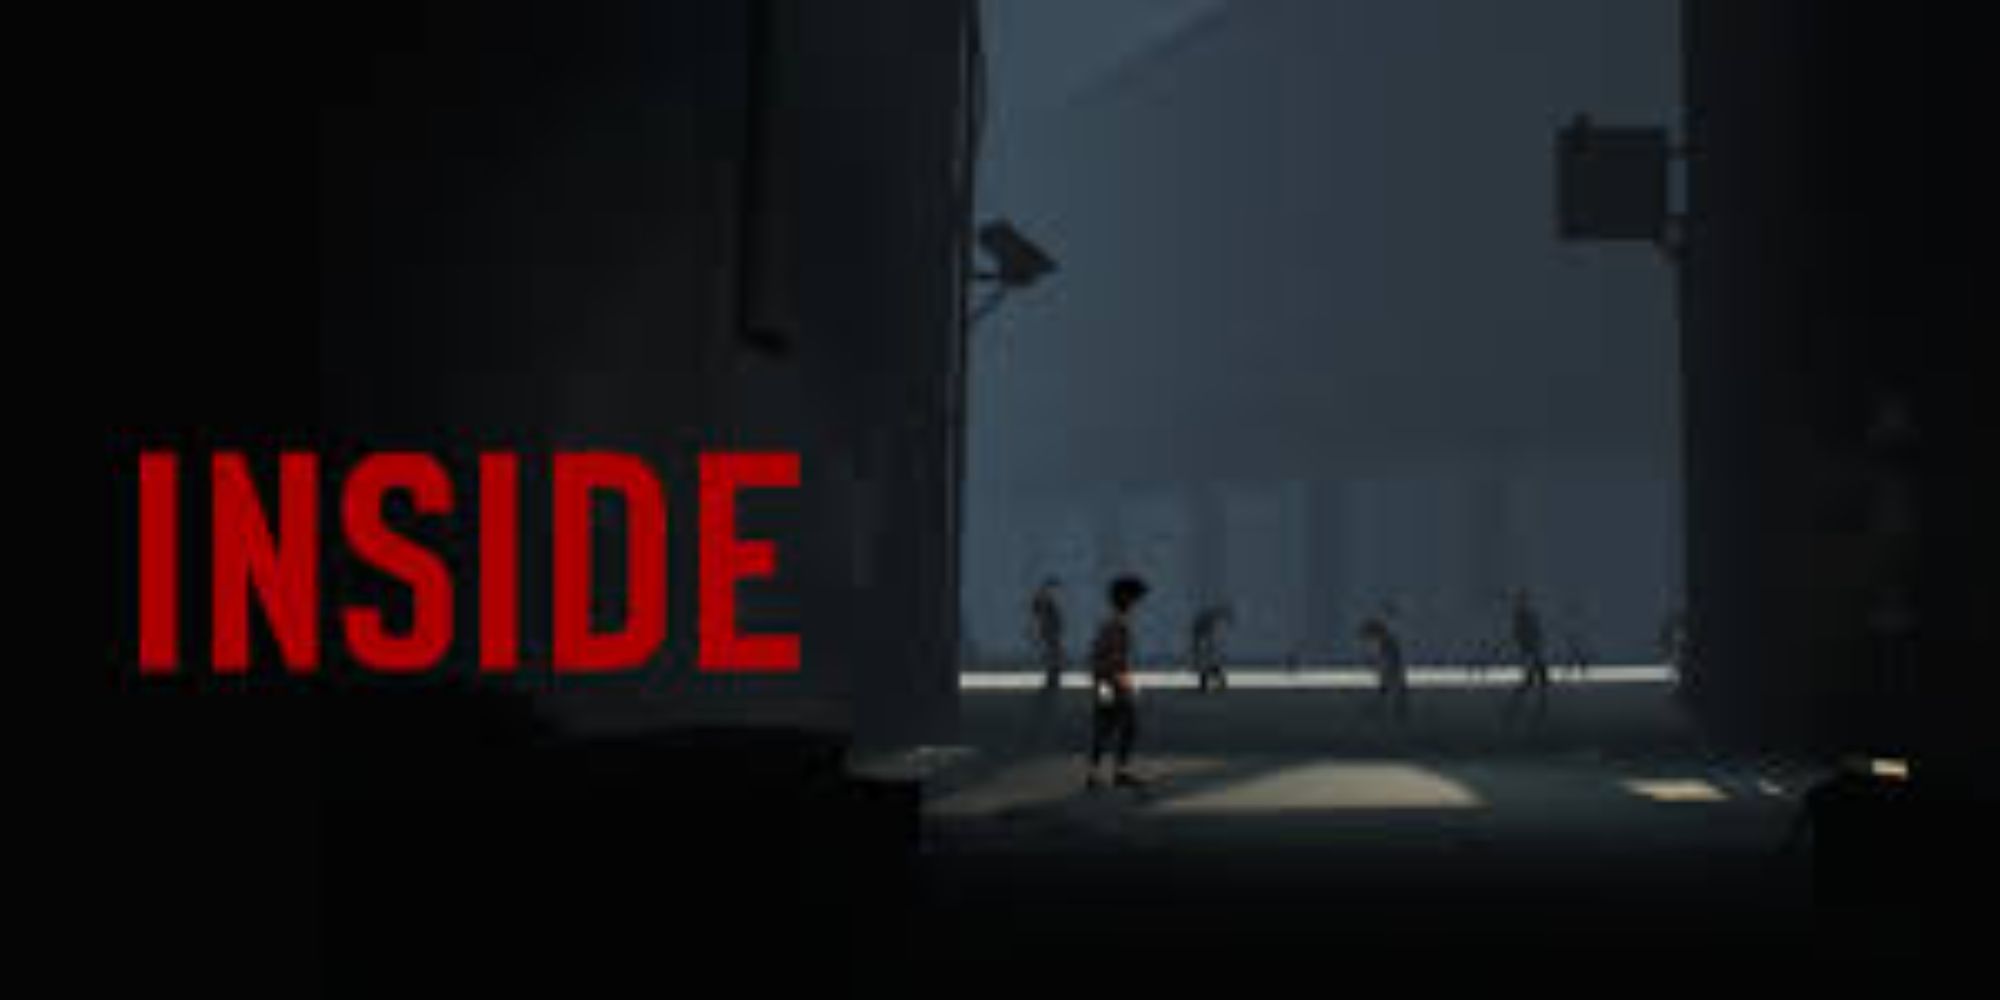 Game cover for Inside, with shadowy figures to the right of the game title in red letters.